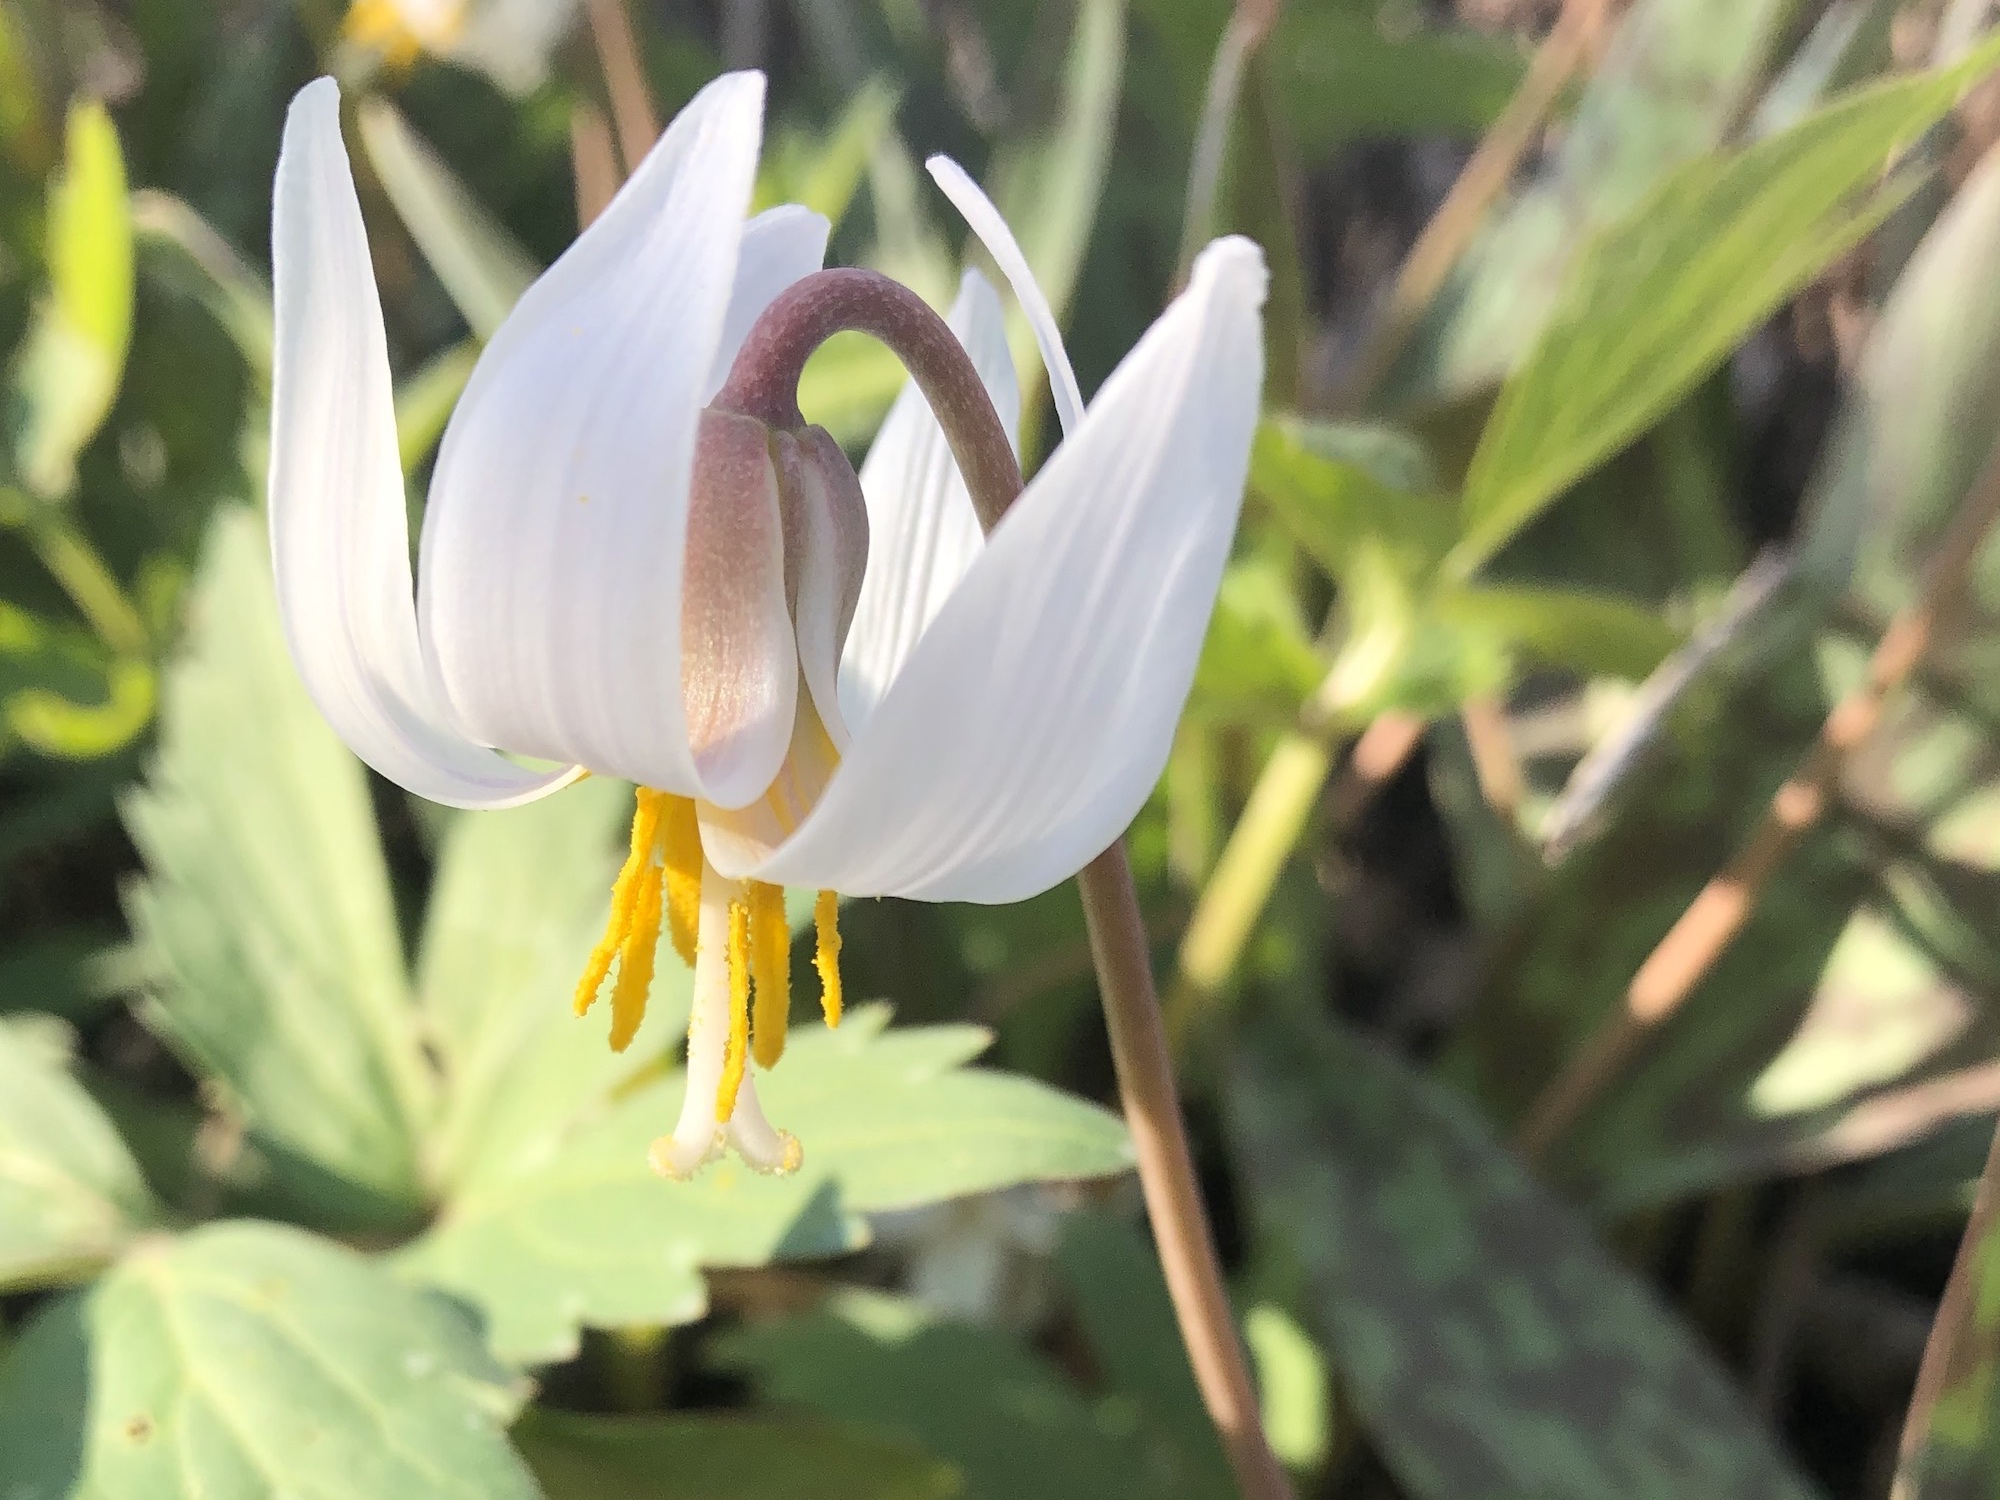 Trout Lily in Oak Savanna in Madison, Wisconsin on April 16, 2021.